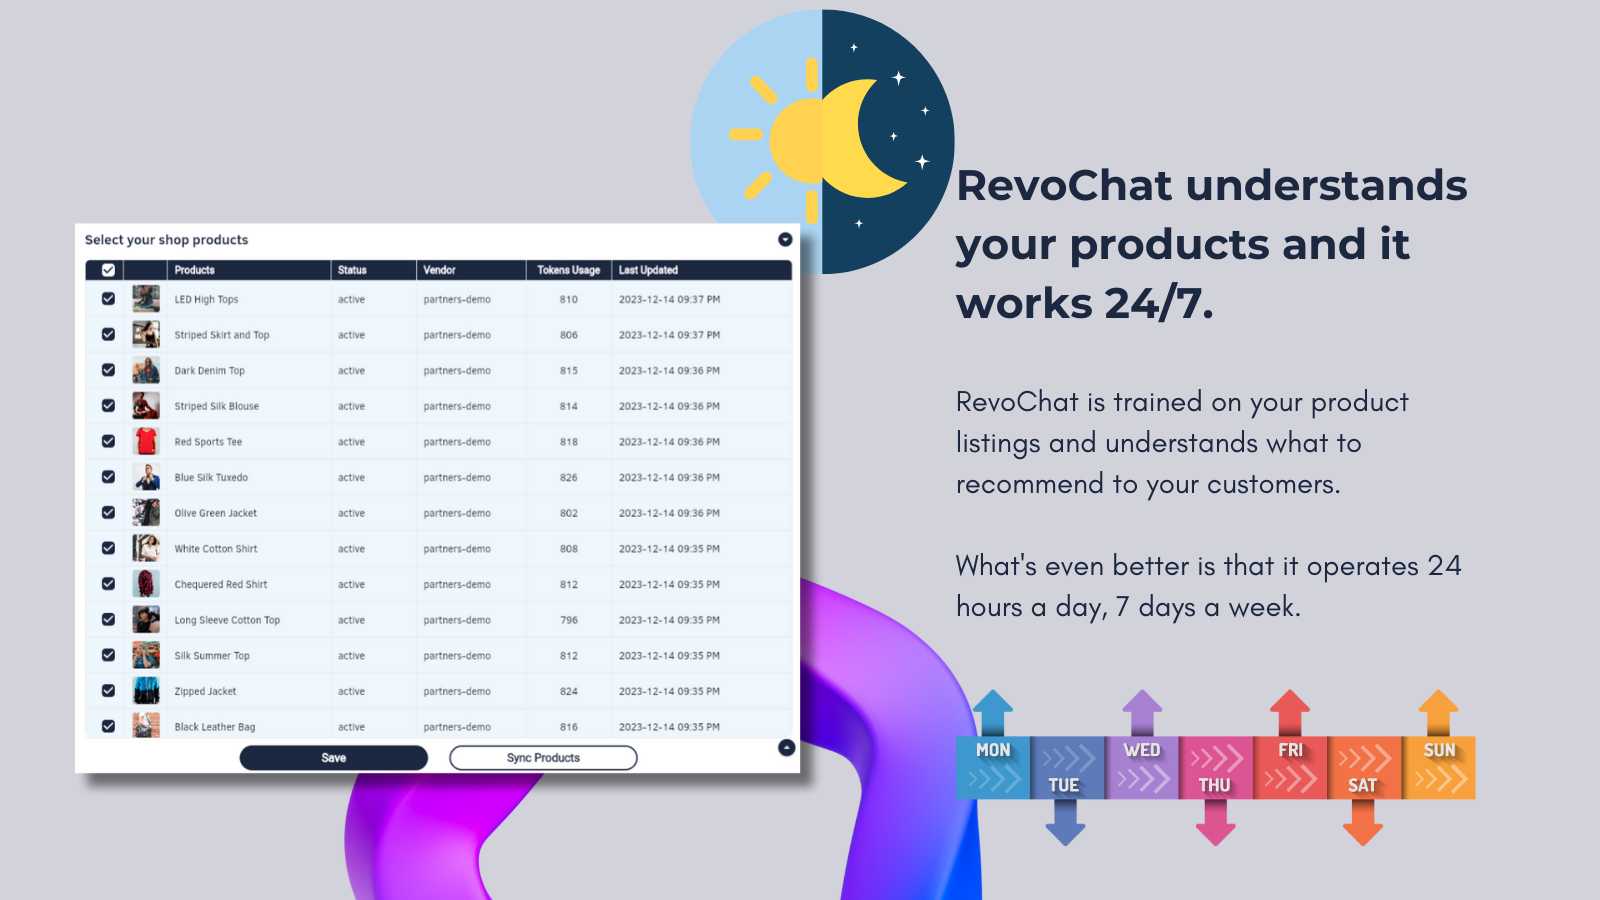 RevoChat supports your customers 24/7